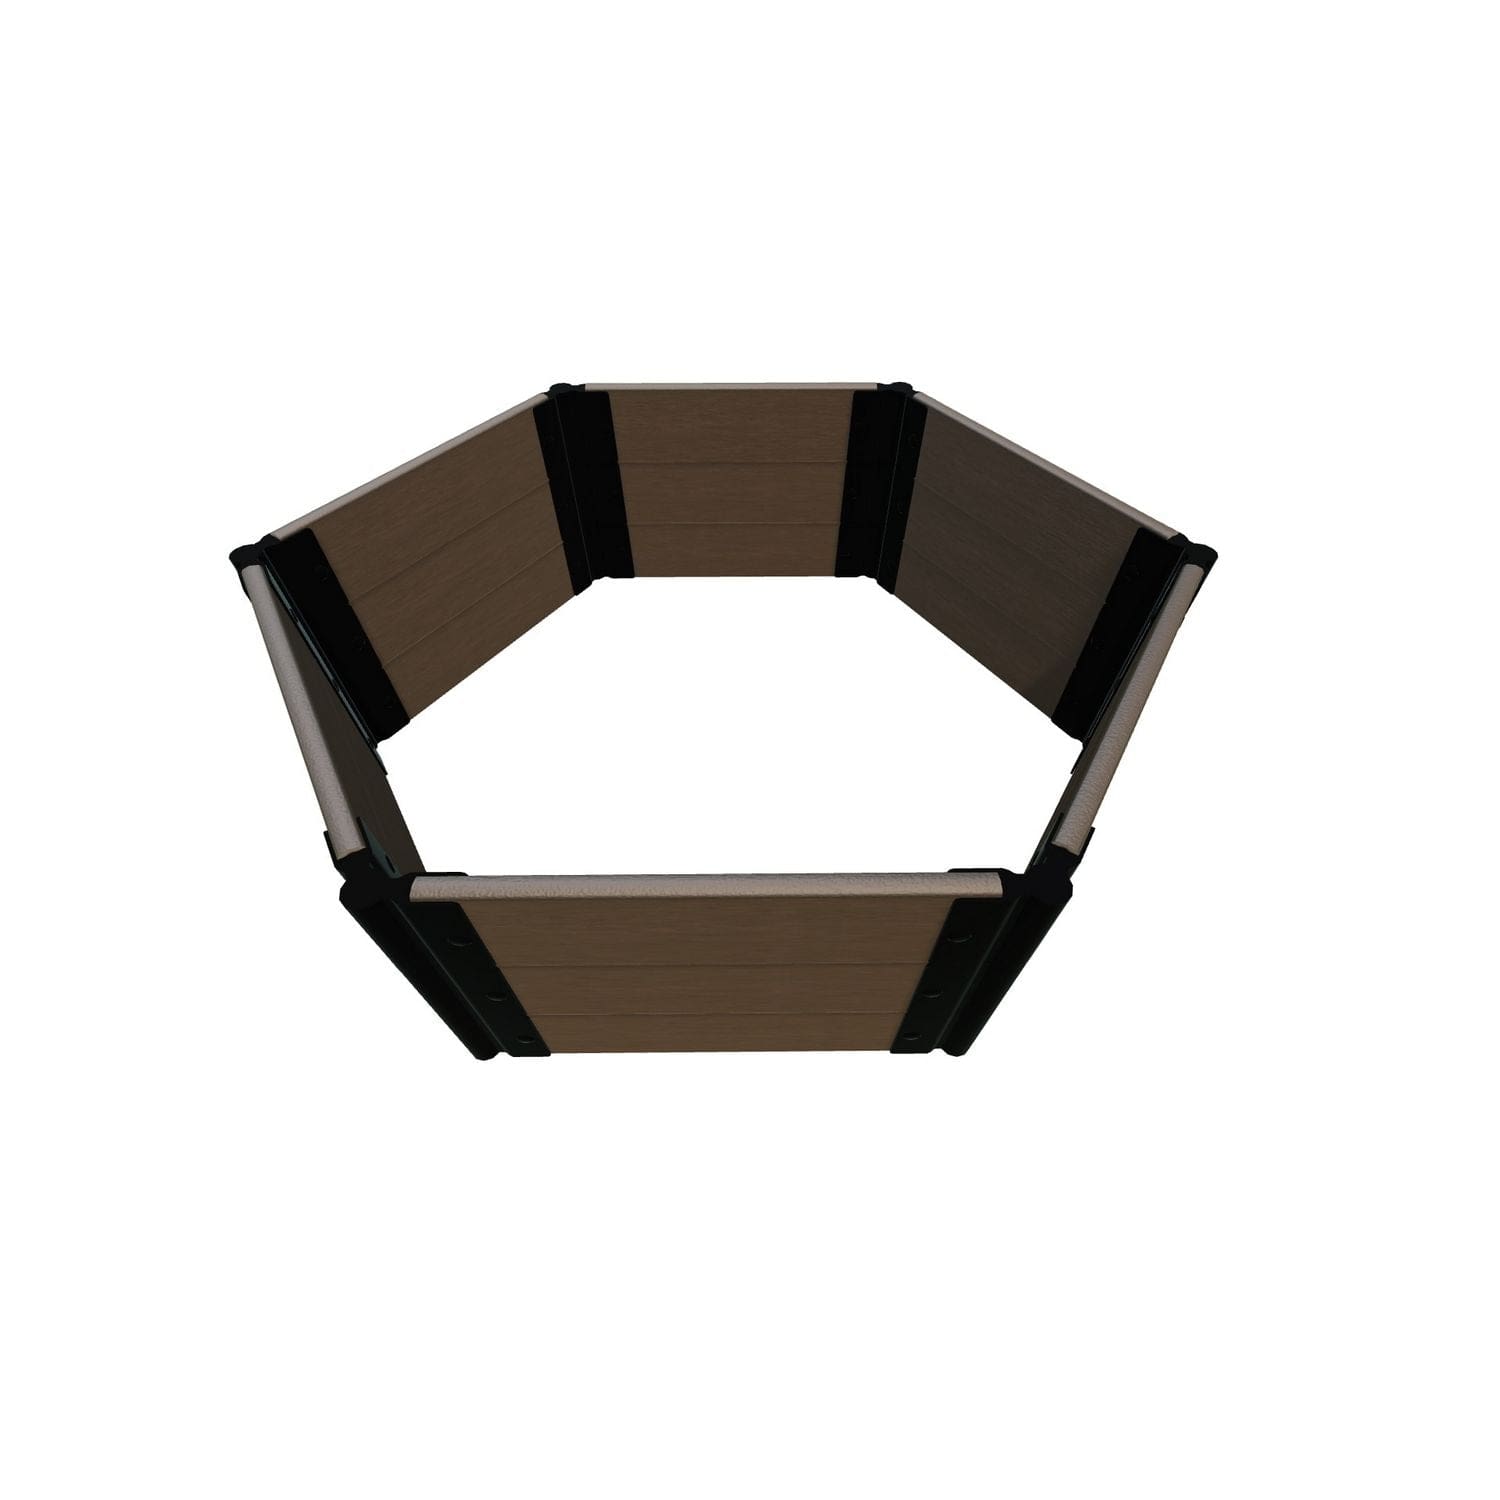 Frame It All Gardening Accessories Frame It All | Tool-Free Fort Jefferson Raised Garden Bed (Hexagon) 4' X 4' X 16.5" - Uptown Brown - 1" Profile 200003469